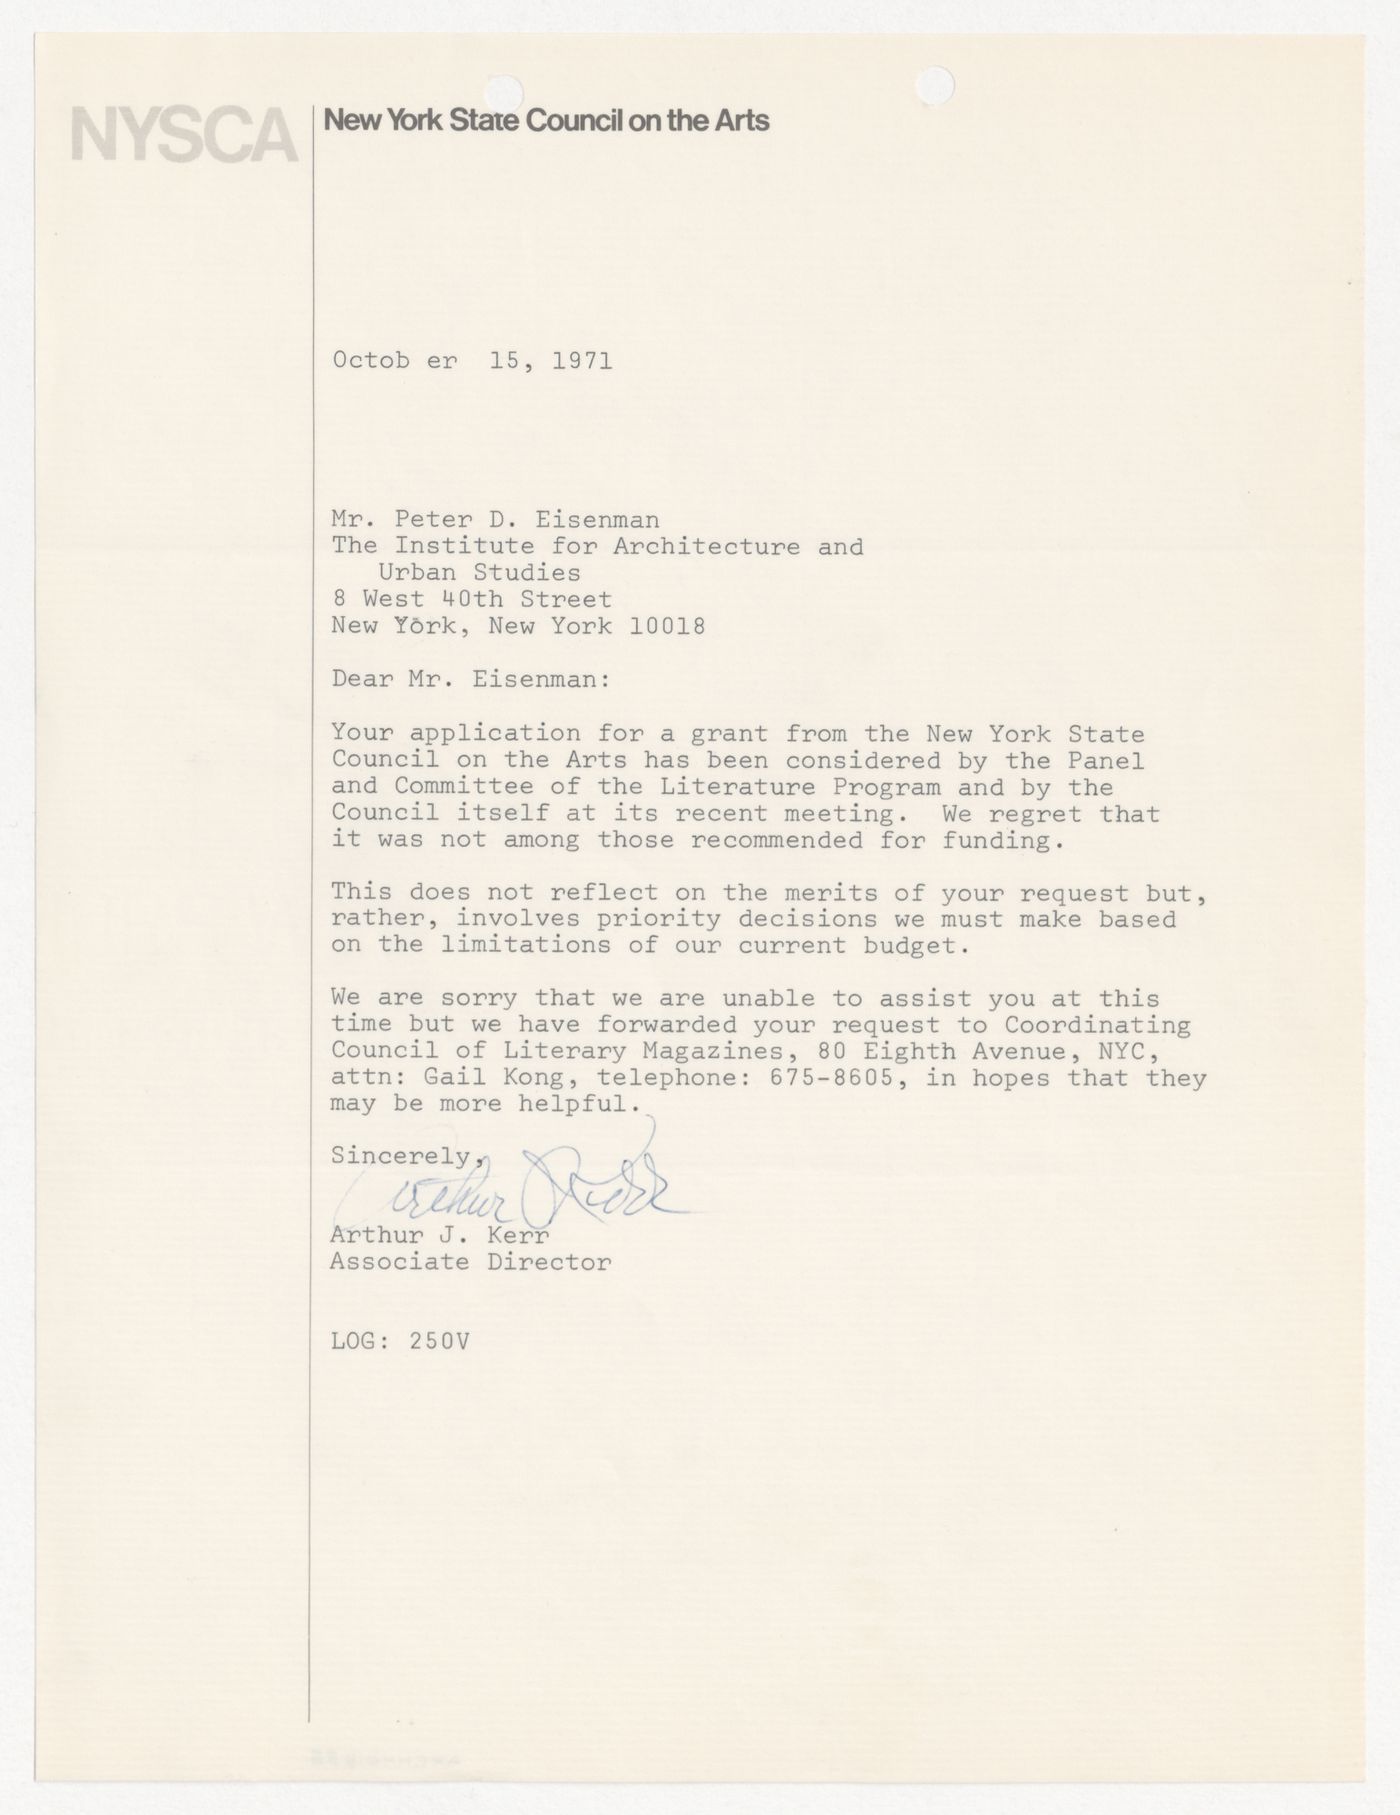 Letter from Arthur J. Kerr to Peter D. Eisenman about a grant from the New York State Council on the Arts (NYSCA)